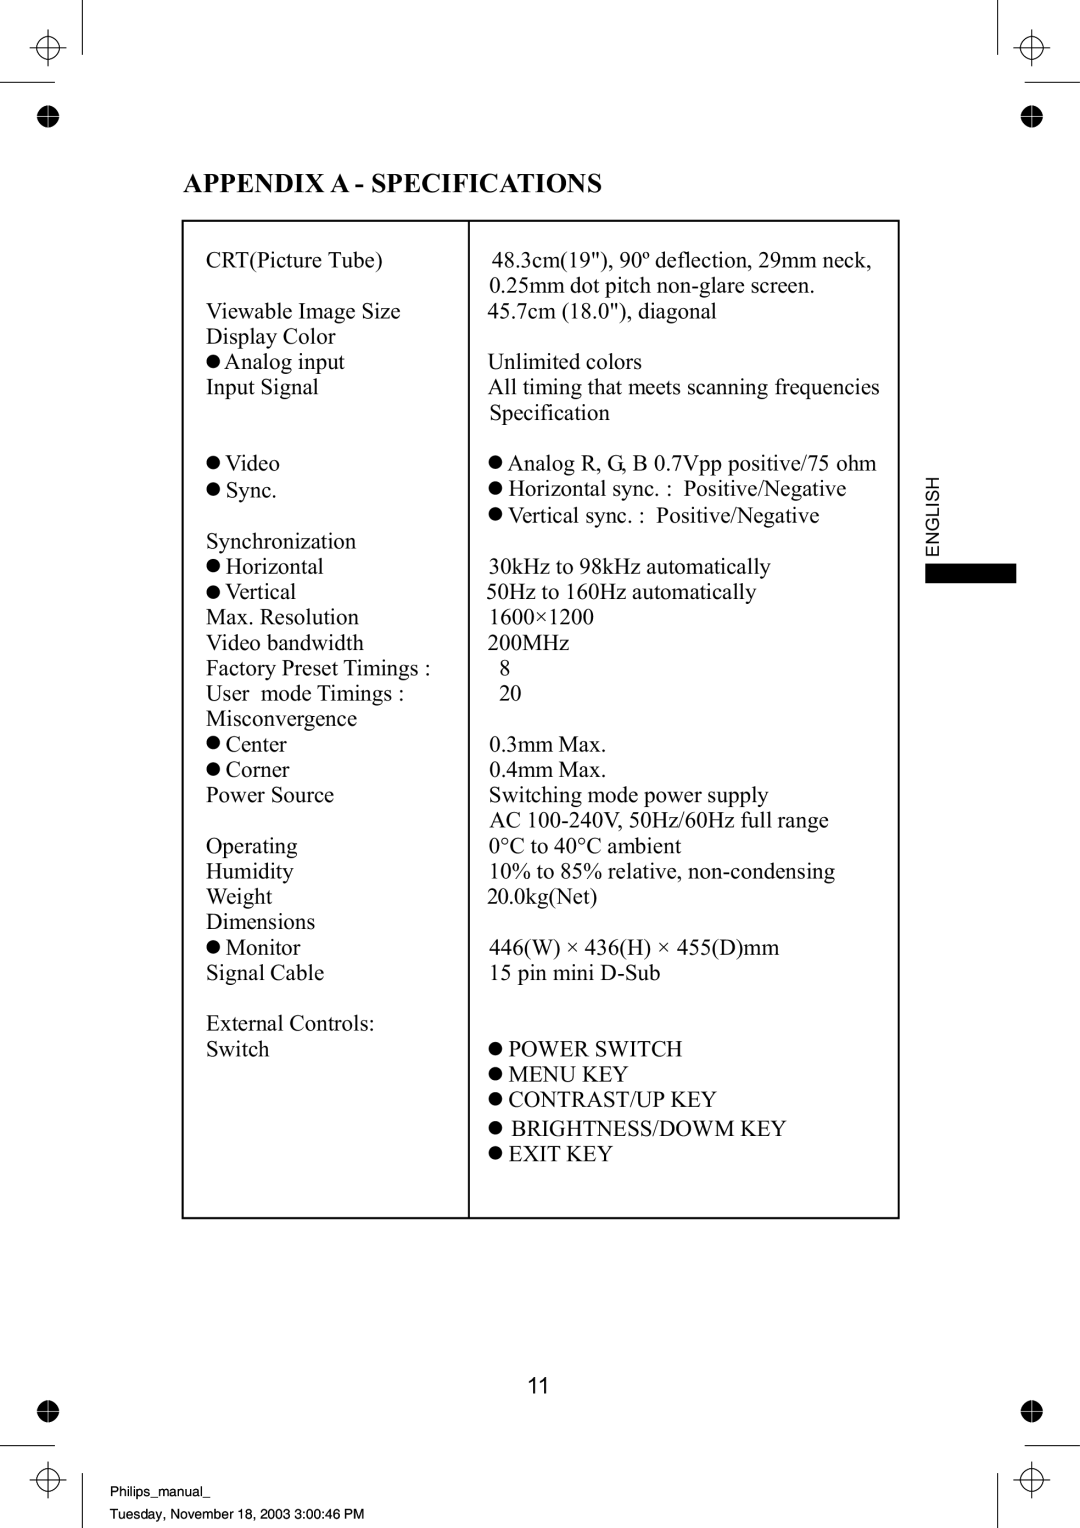 Philips 109B61 manual Appendix A - Specifications 